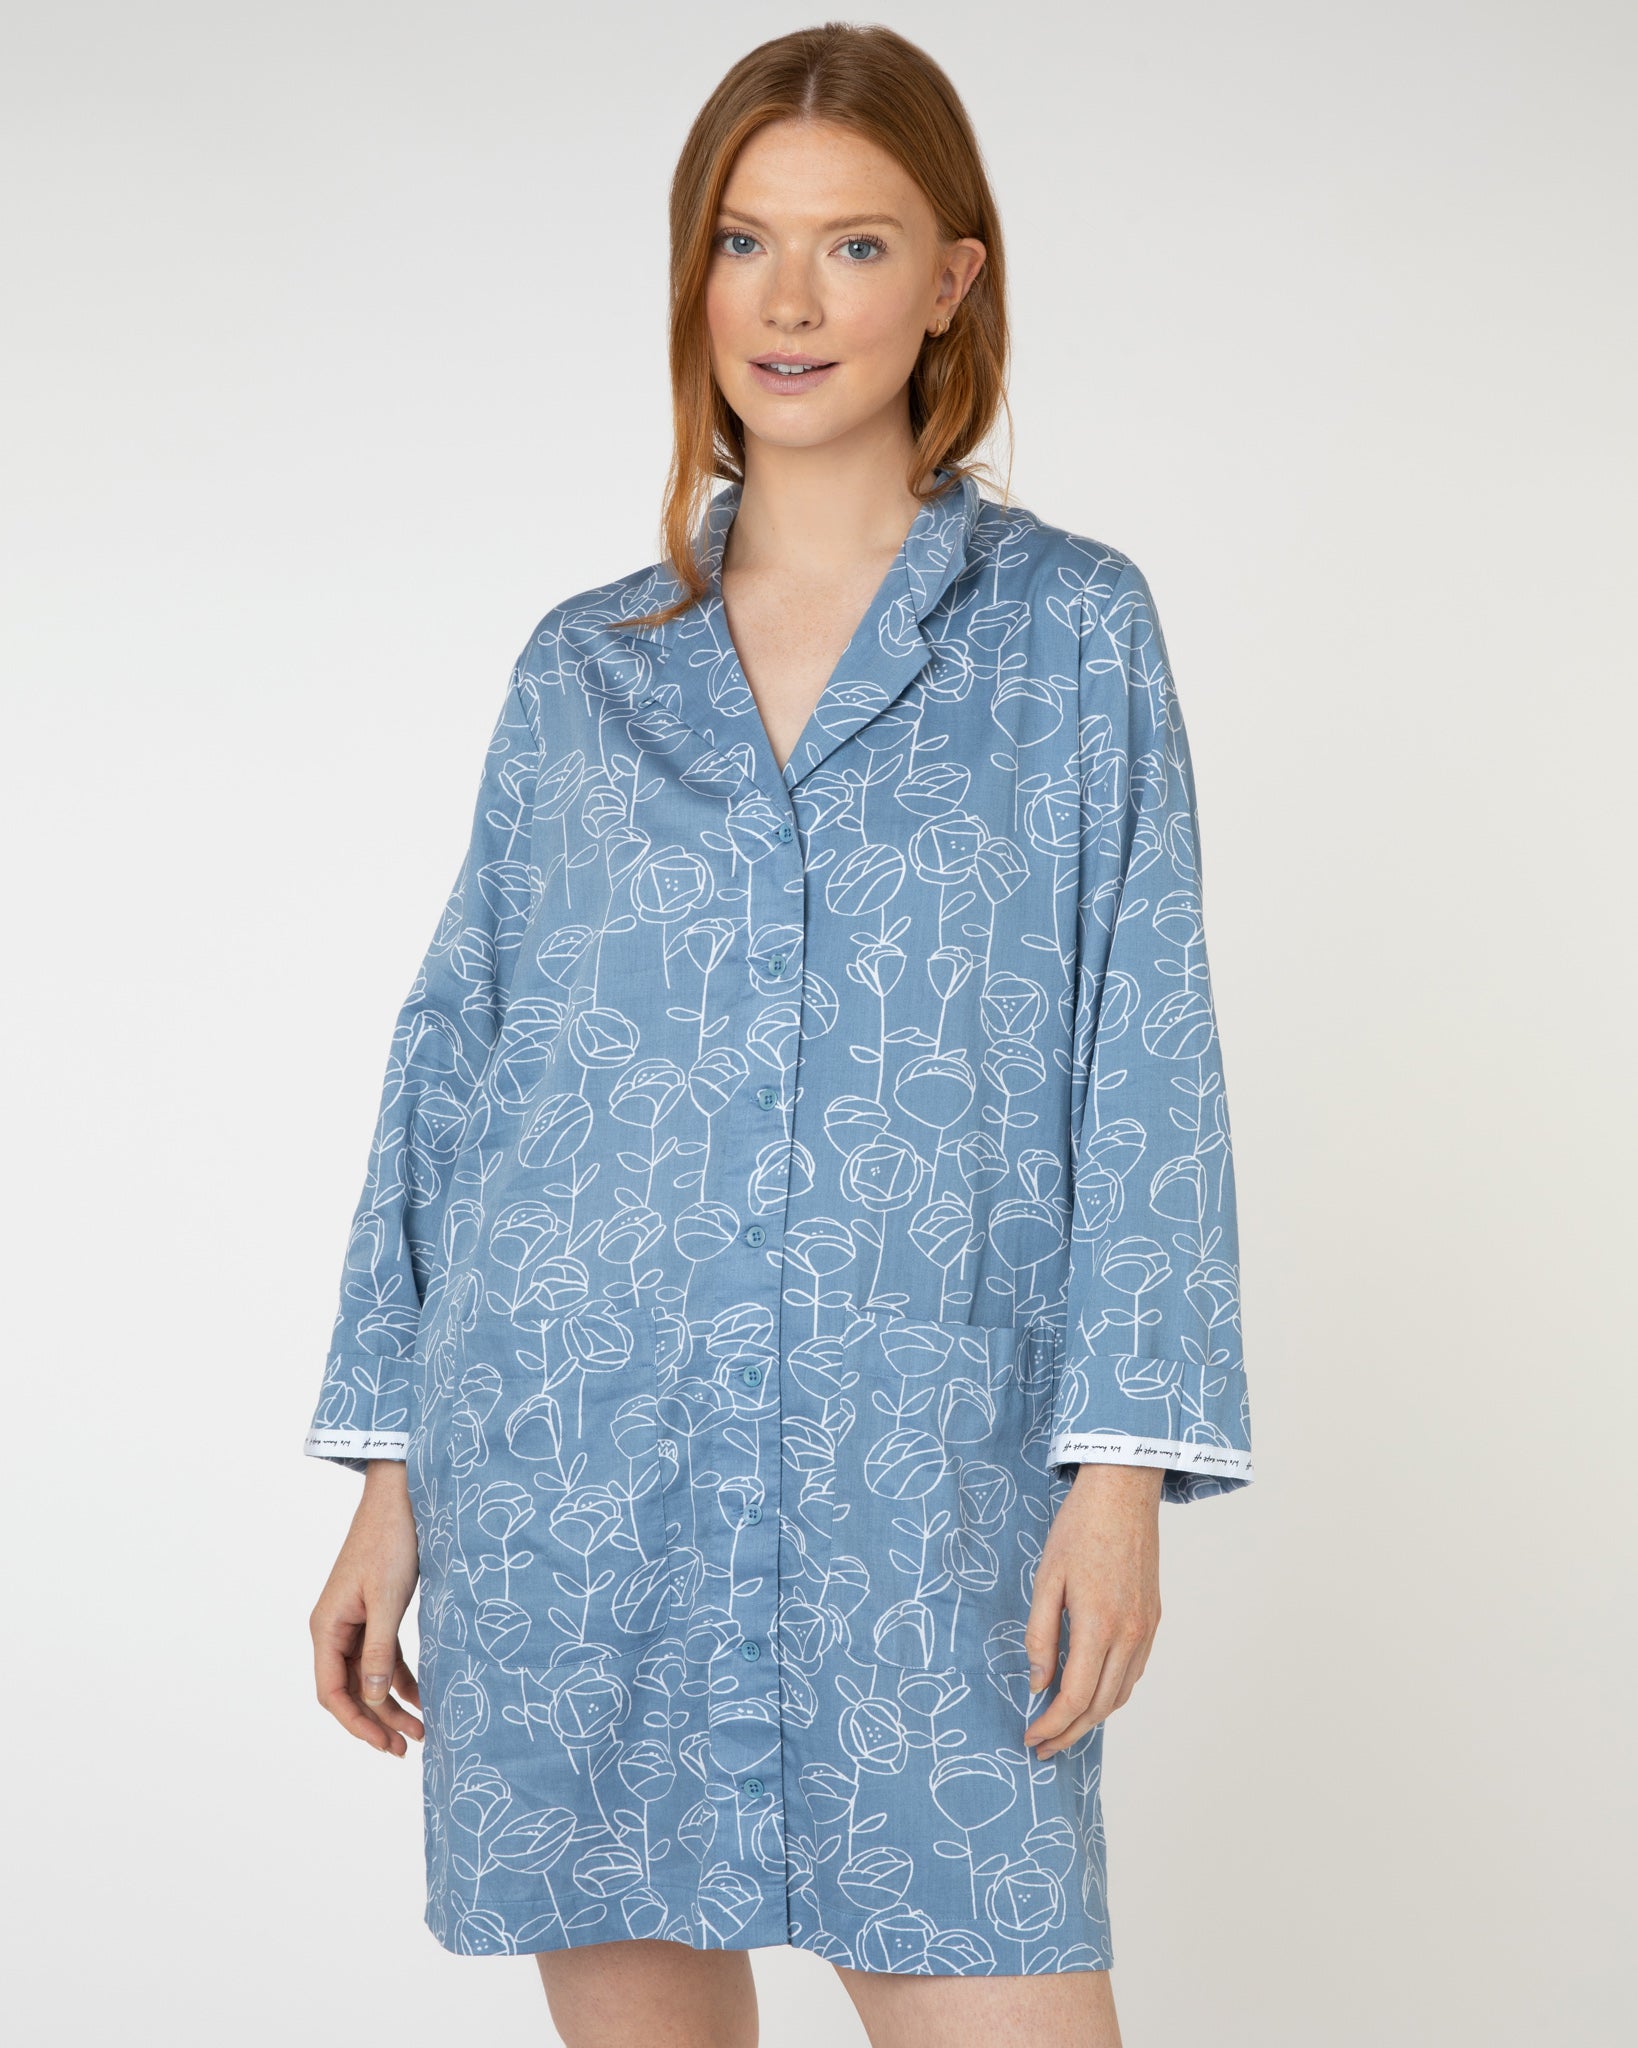 Woman wearing blue and white floral luxury organic cotton nightshirt from Yawn.